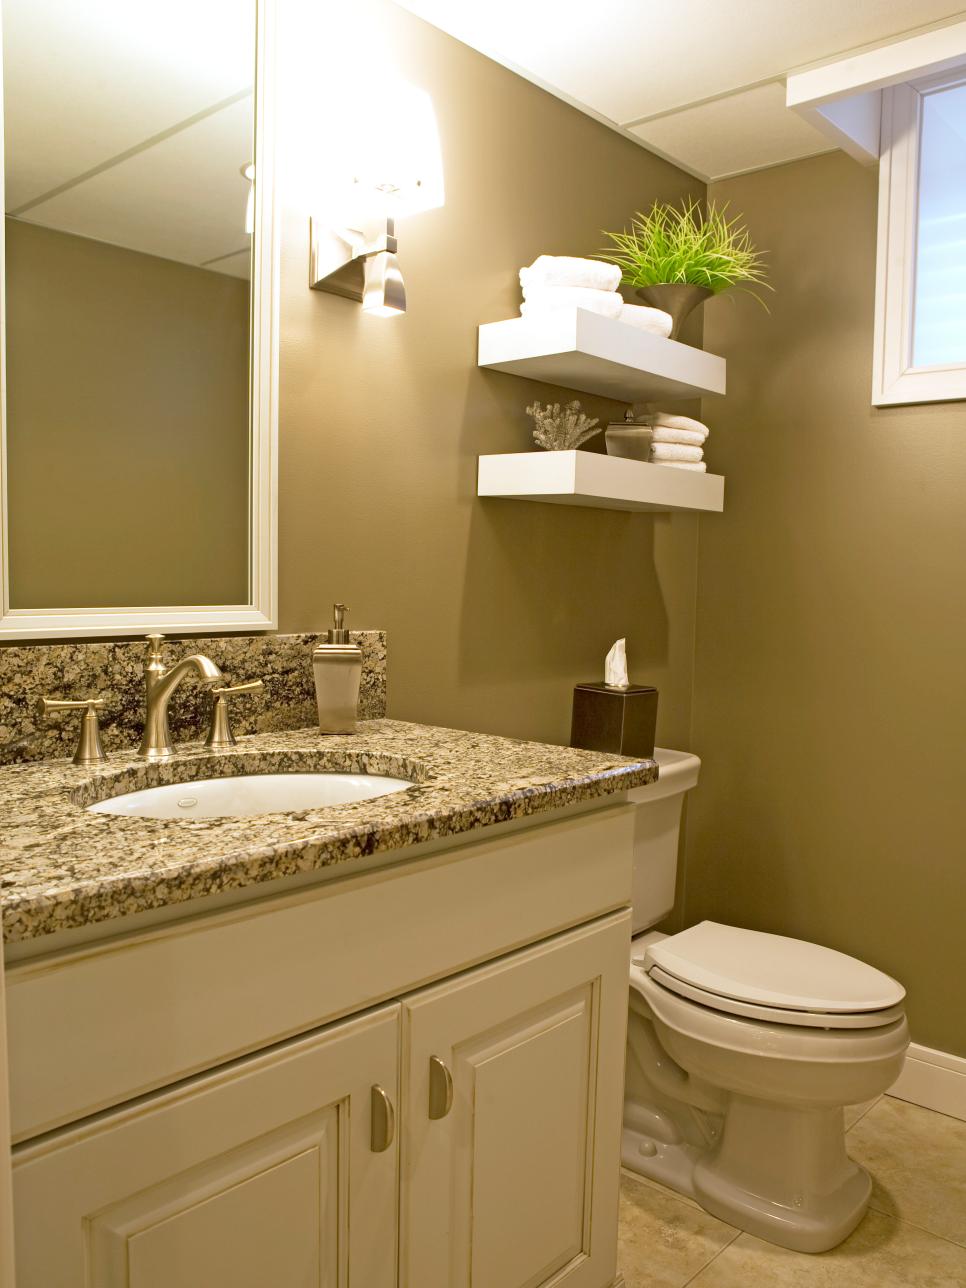 Basement Bathroom in a White and Mocha Color Palette